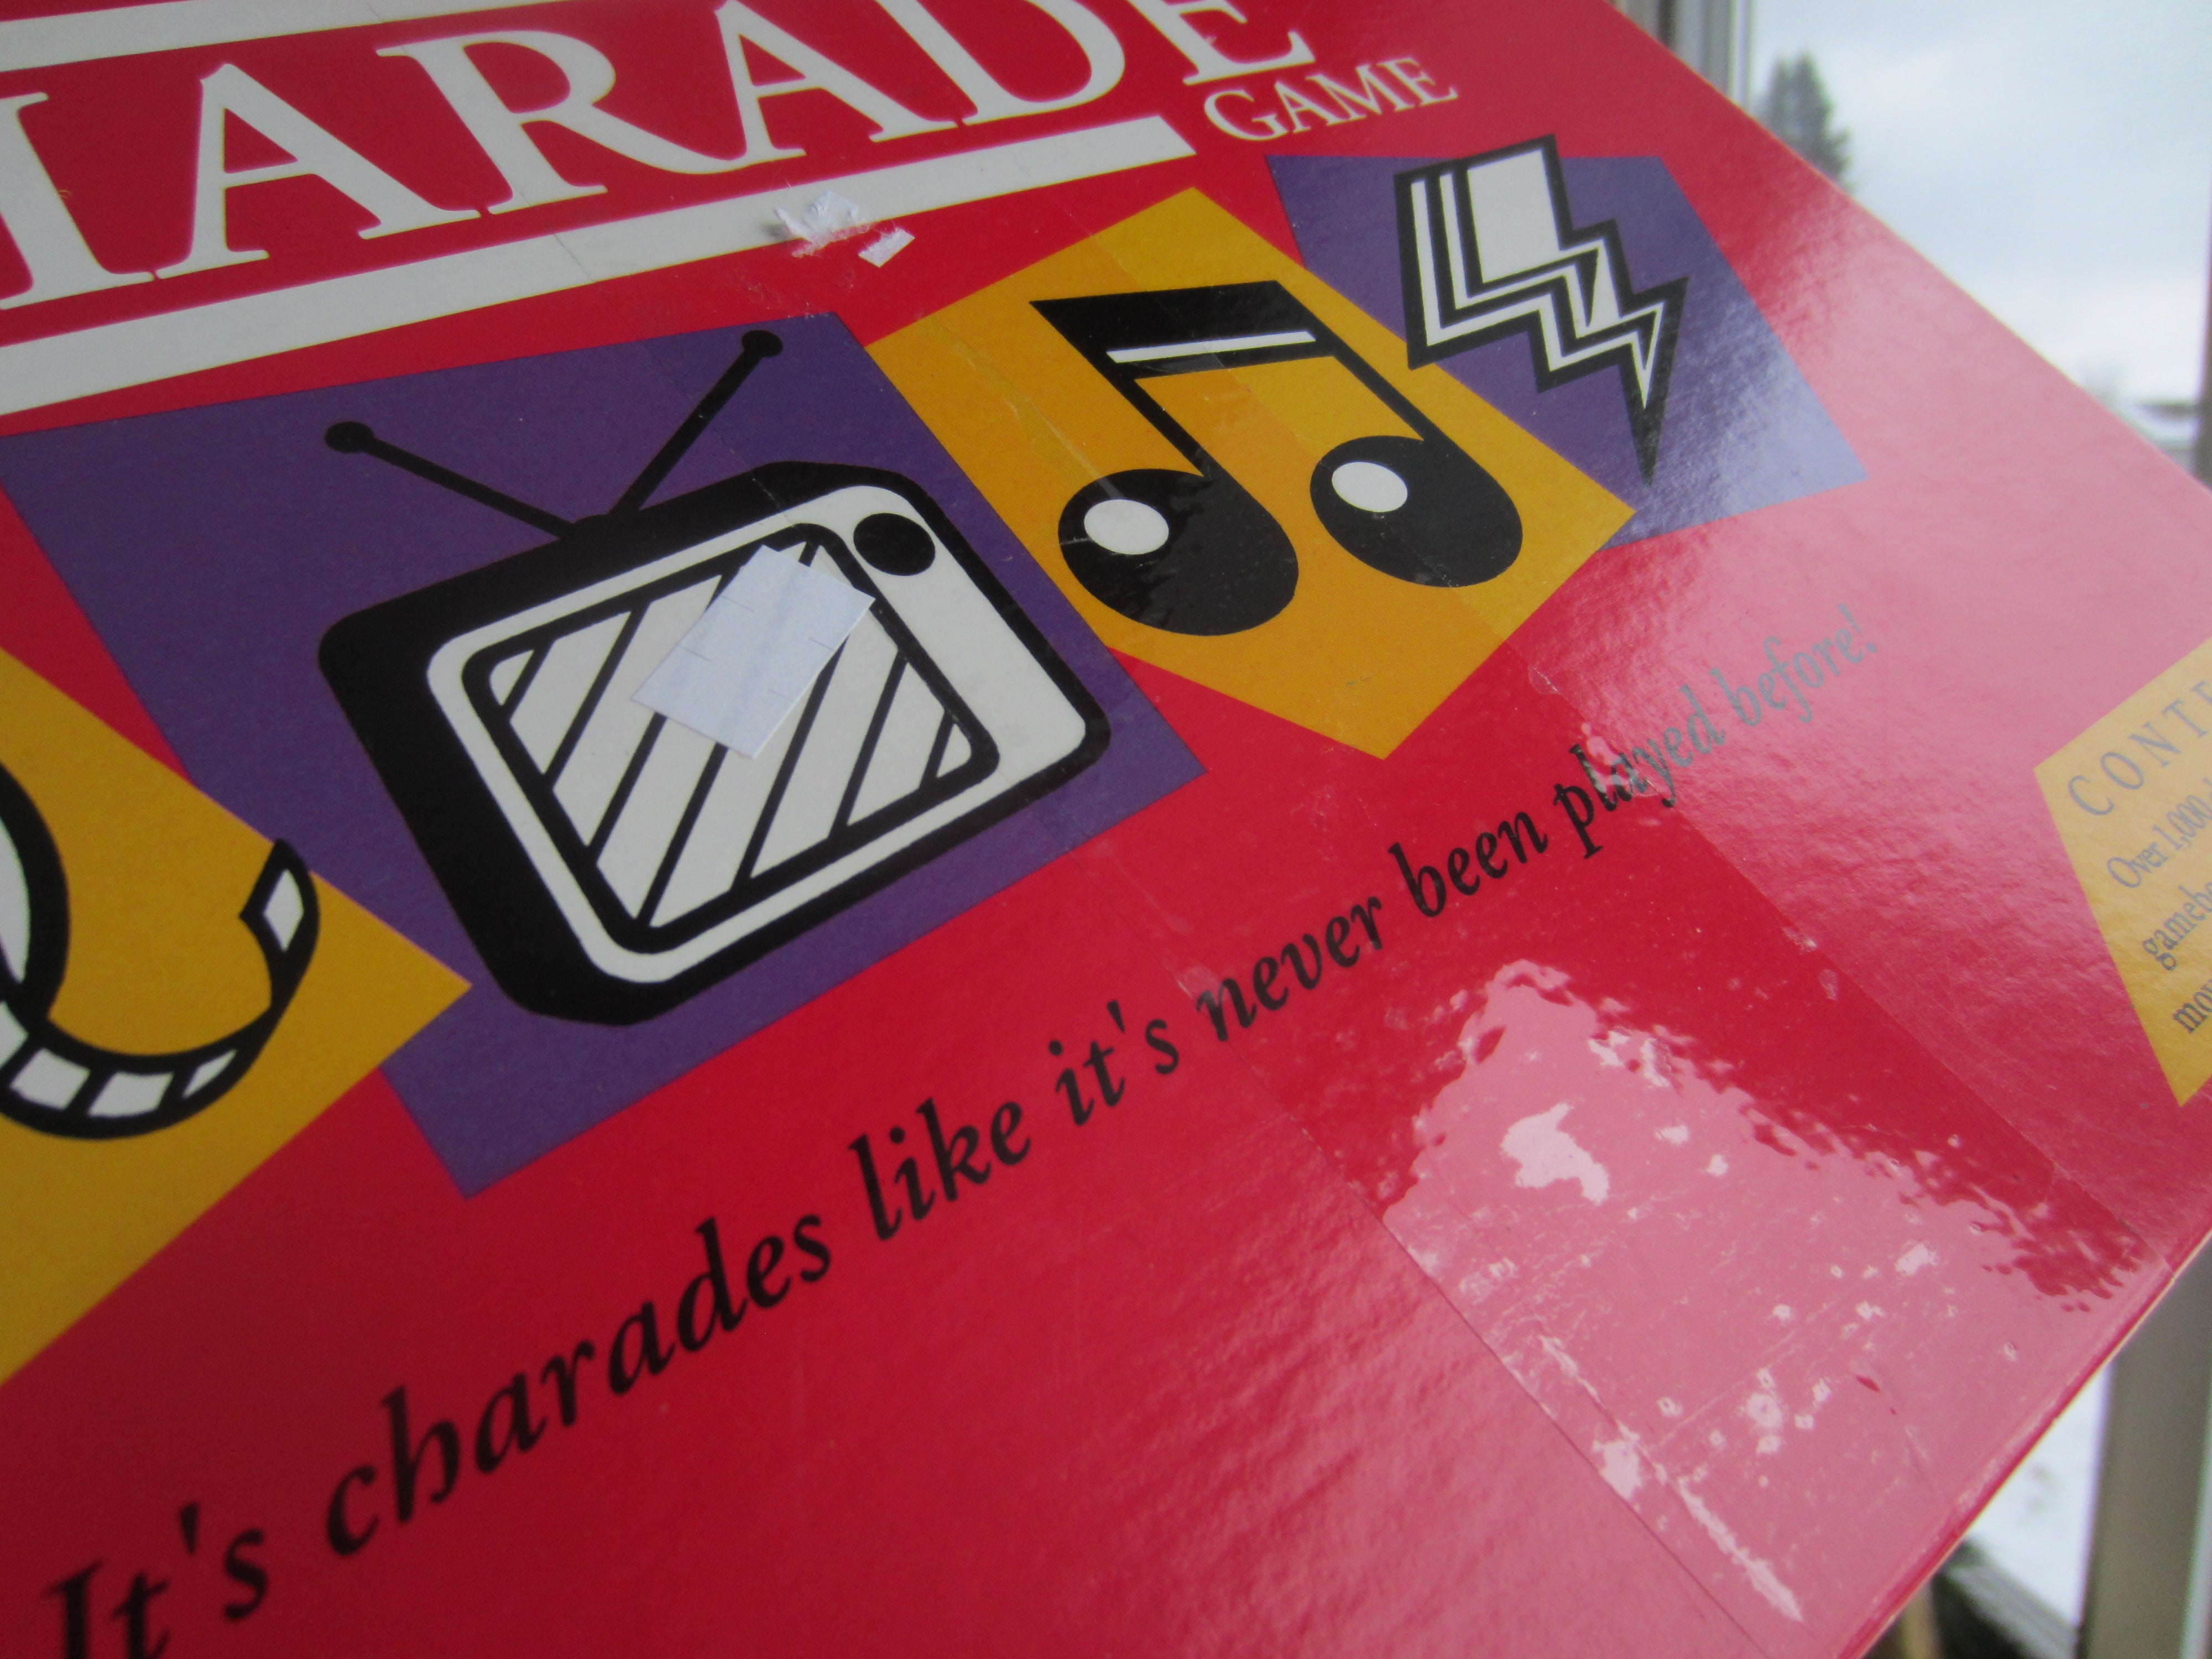 The Charade Game